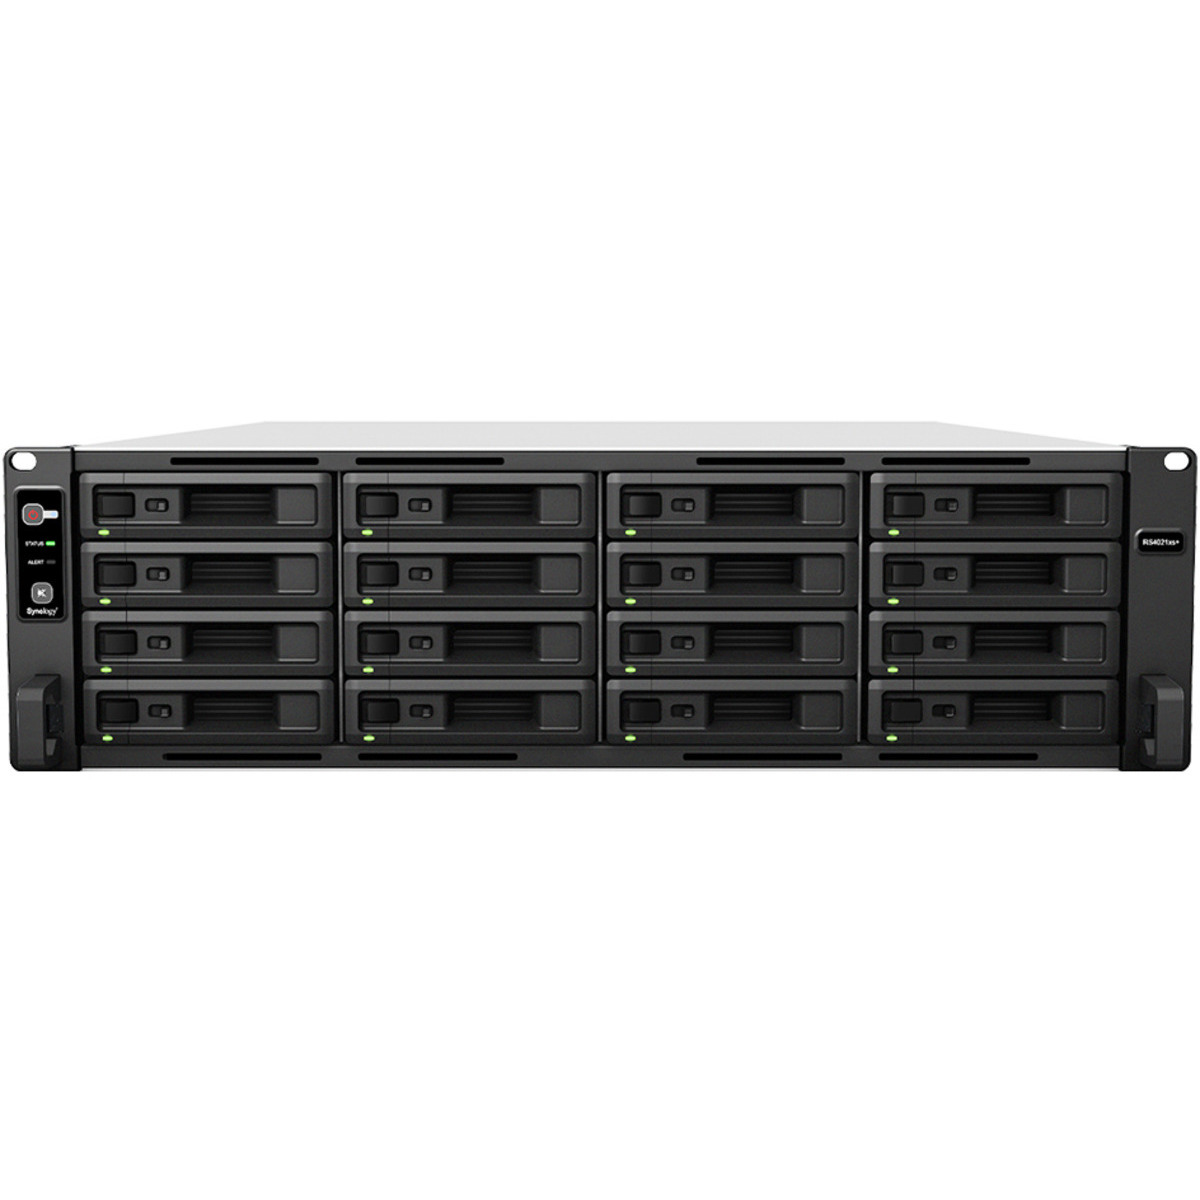 Synology RackStation RS4021xs+ 130tb 16-Bay RackMount Large Business / Enterprise NAS - Network Attached Storage Device 13x10tb Seagate IronWolf ST10000VN000 3.5 7200rpm SATA 6Gb/s HDD NAS Class Drives Installed - Burn-In Tested RackStation RS4021xs+